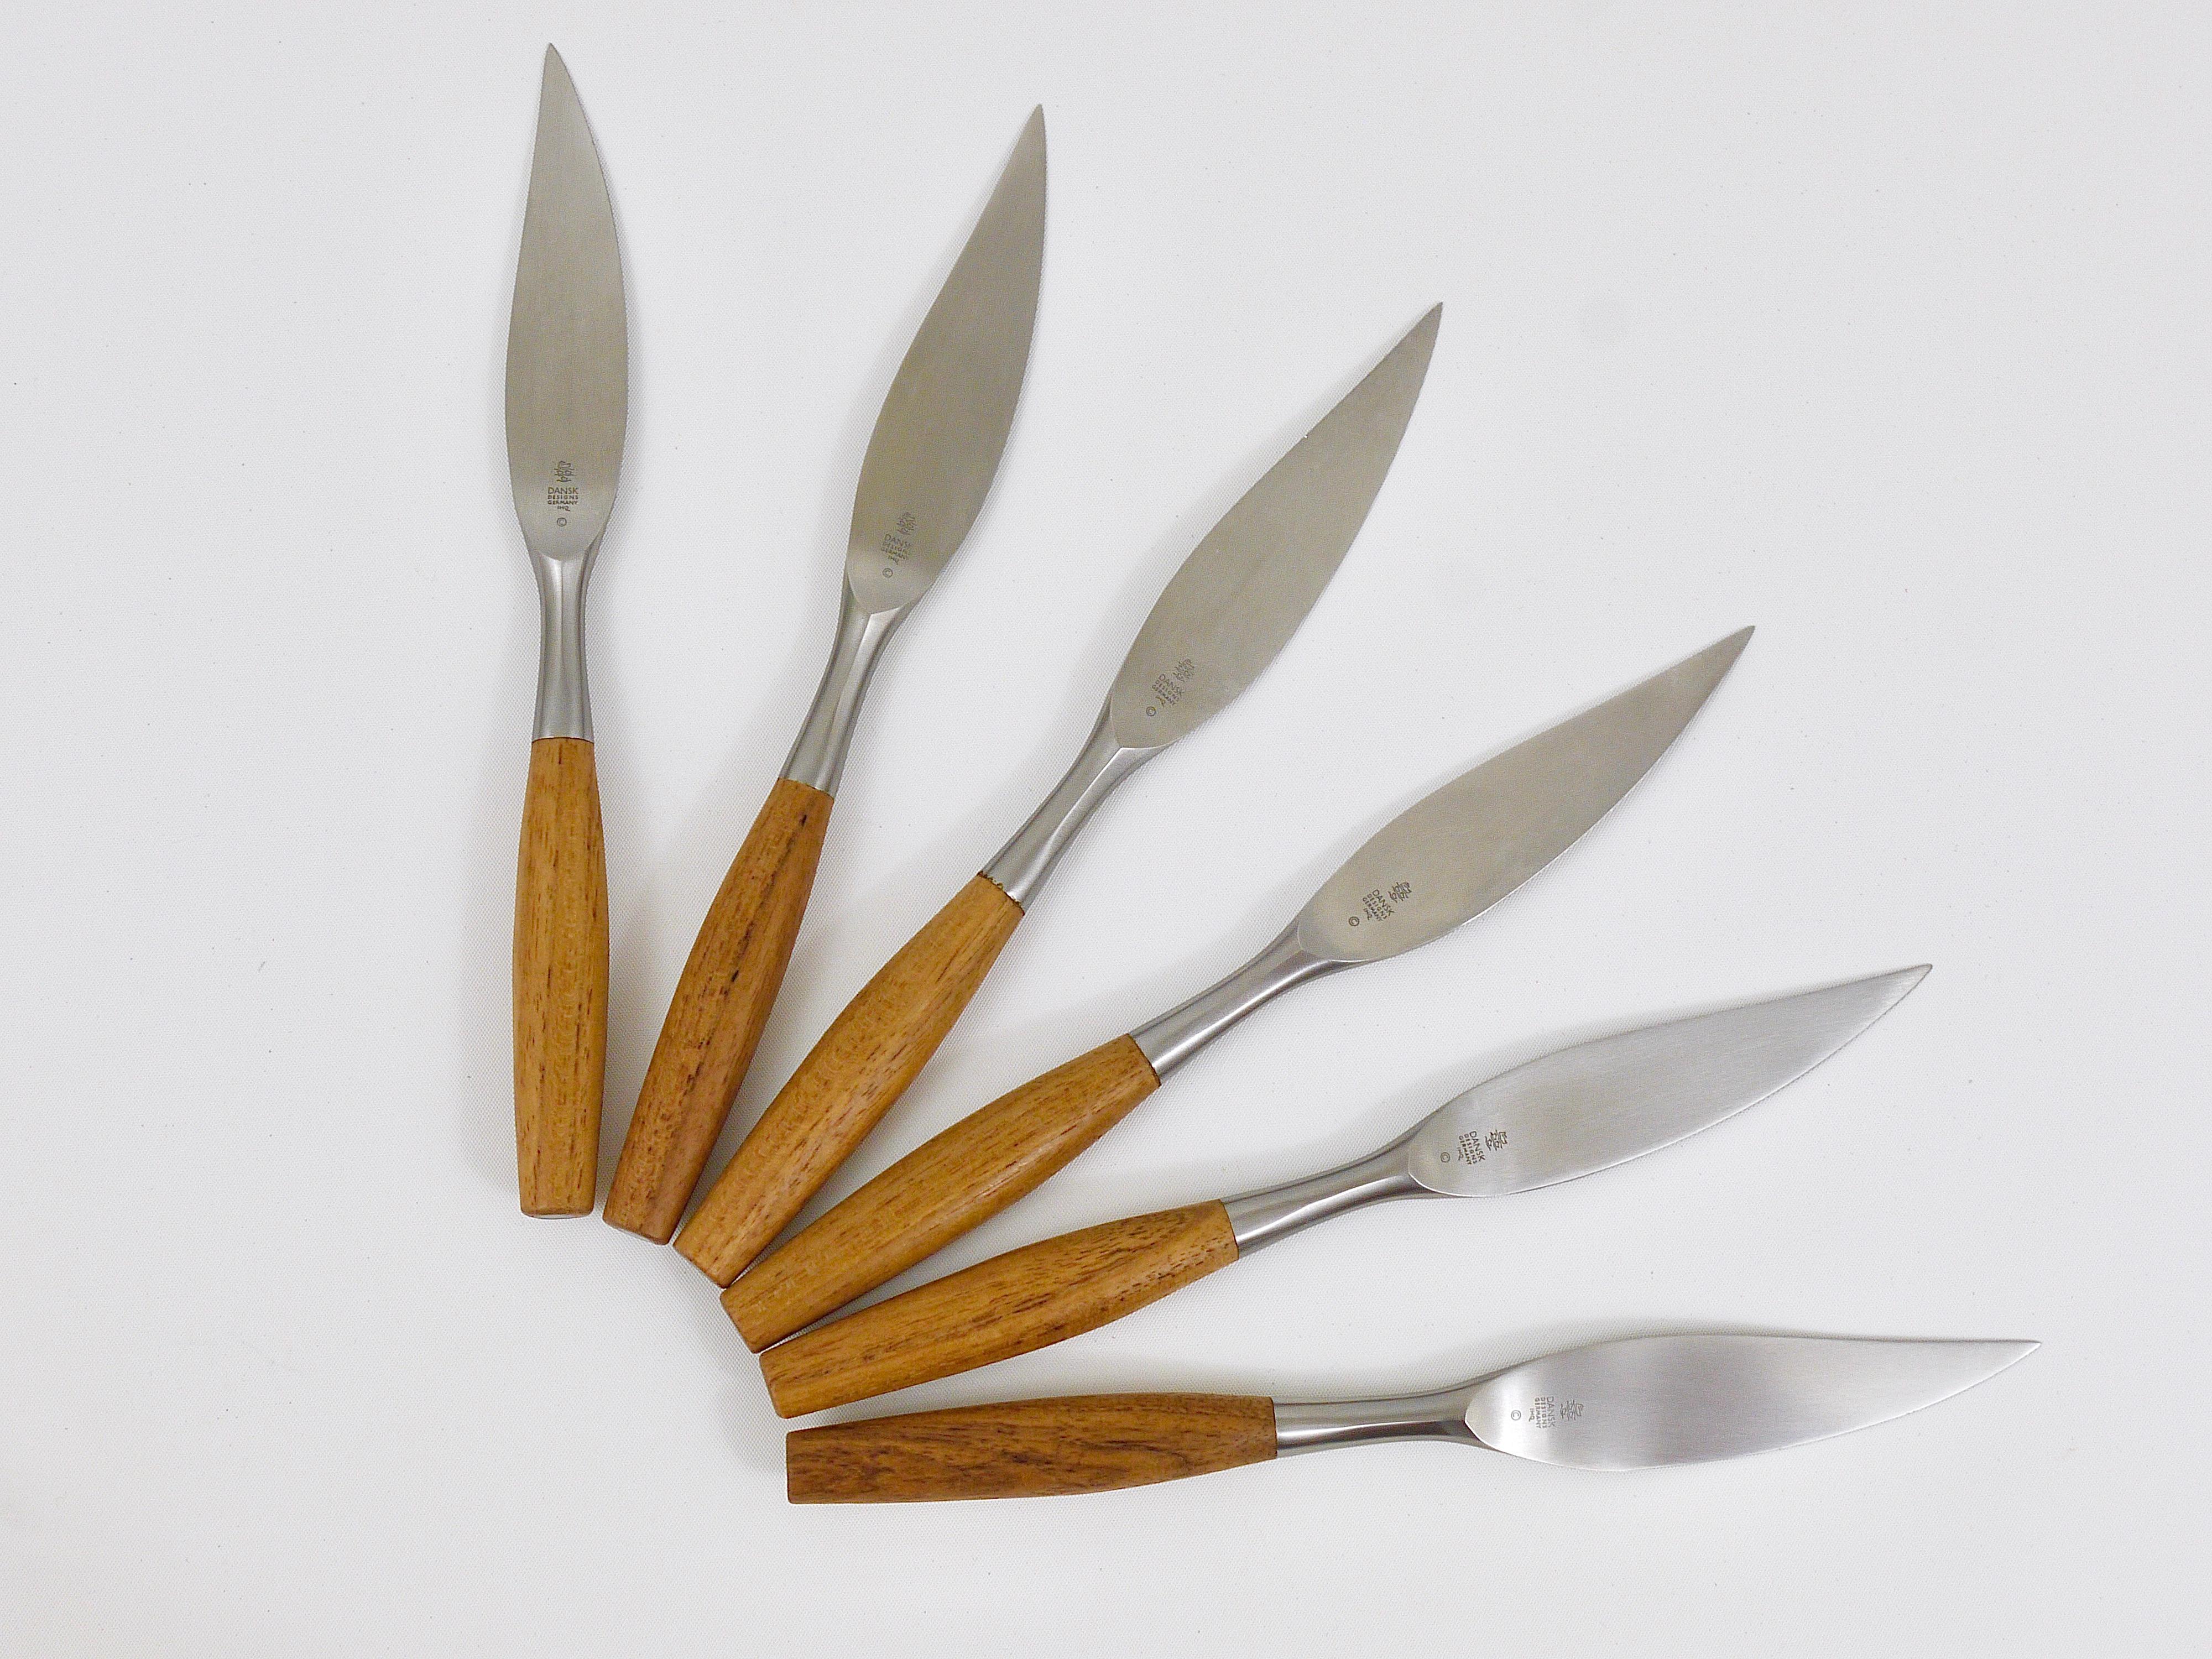 A set of six midcentury Danish modern steak knives, designed in the 1950s by Jens Quistgaard for Dansk. Beautiful and hard-to-find cutlery made of stainless steel with beautiful teak handles, which is part of the collection of the Museum of Modern